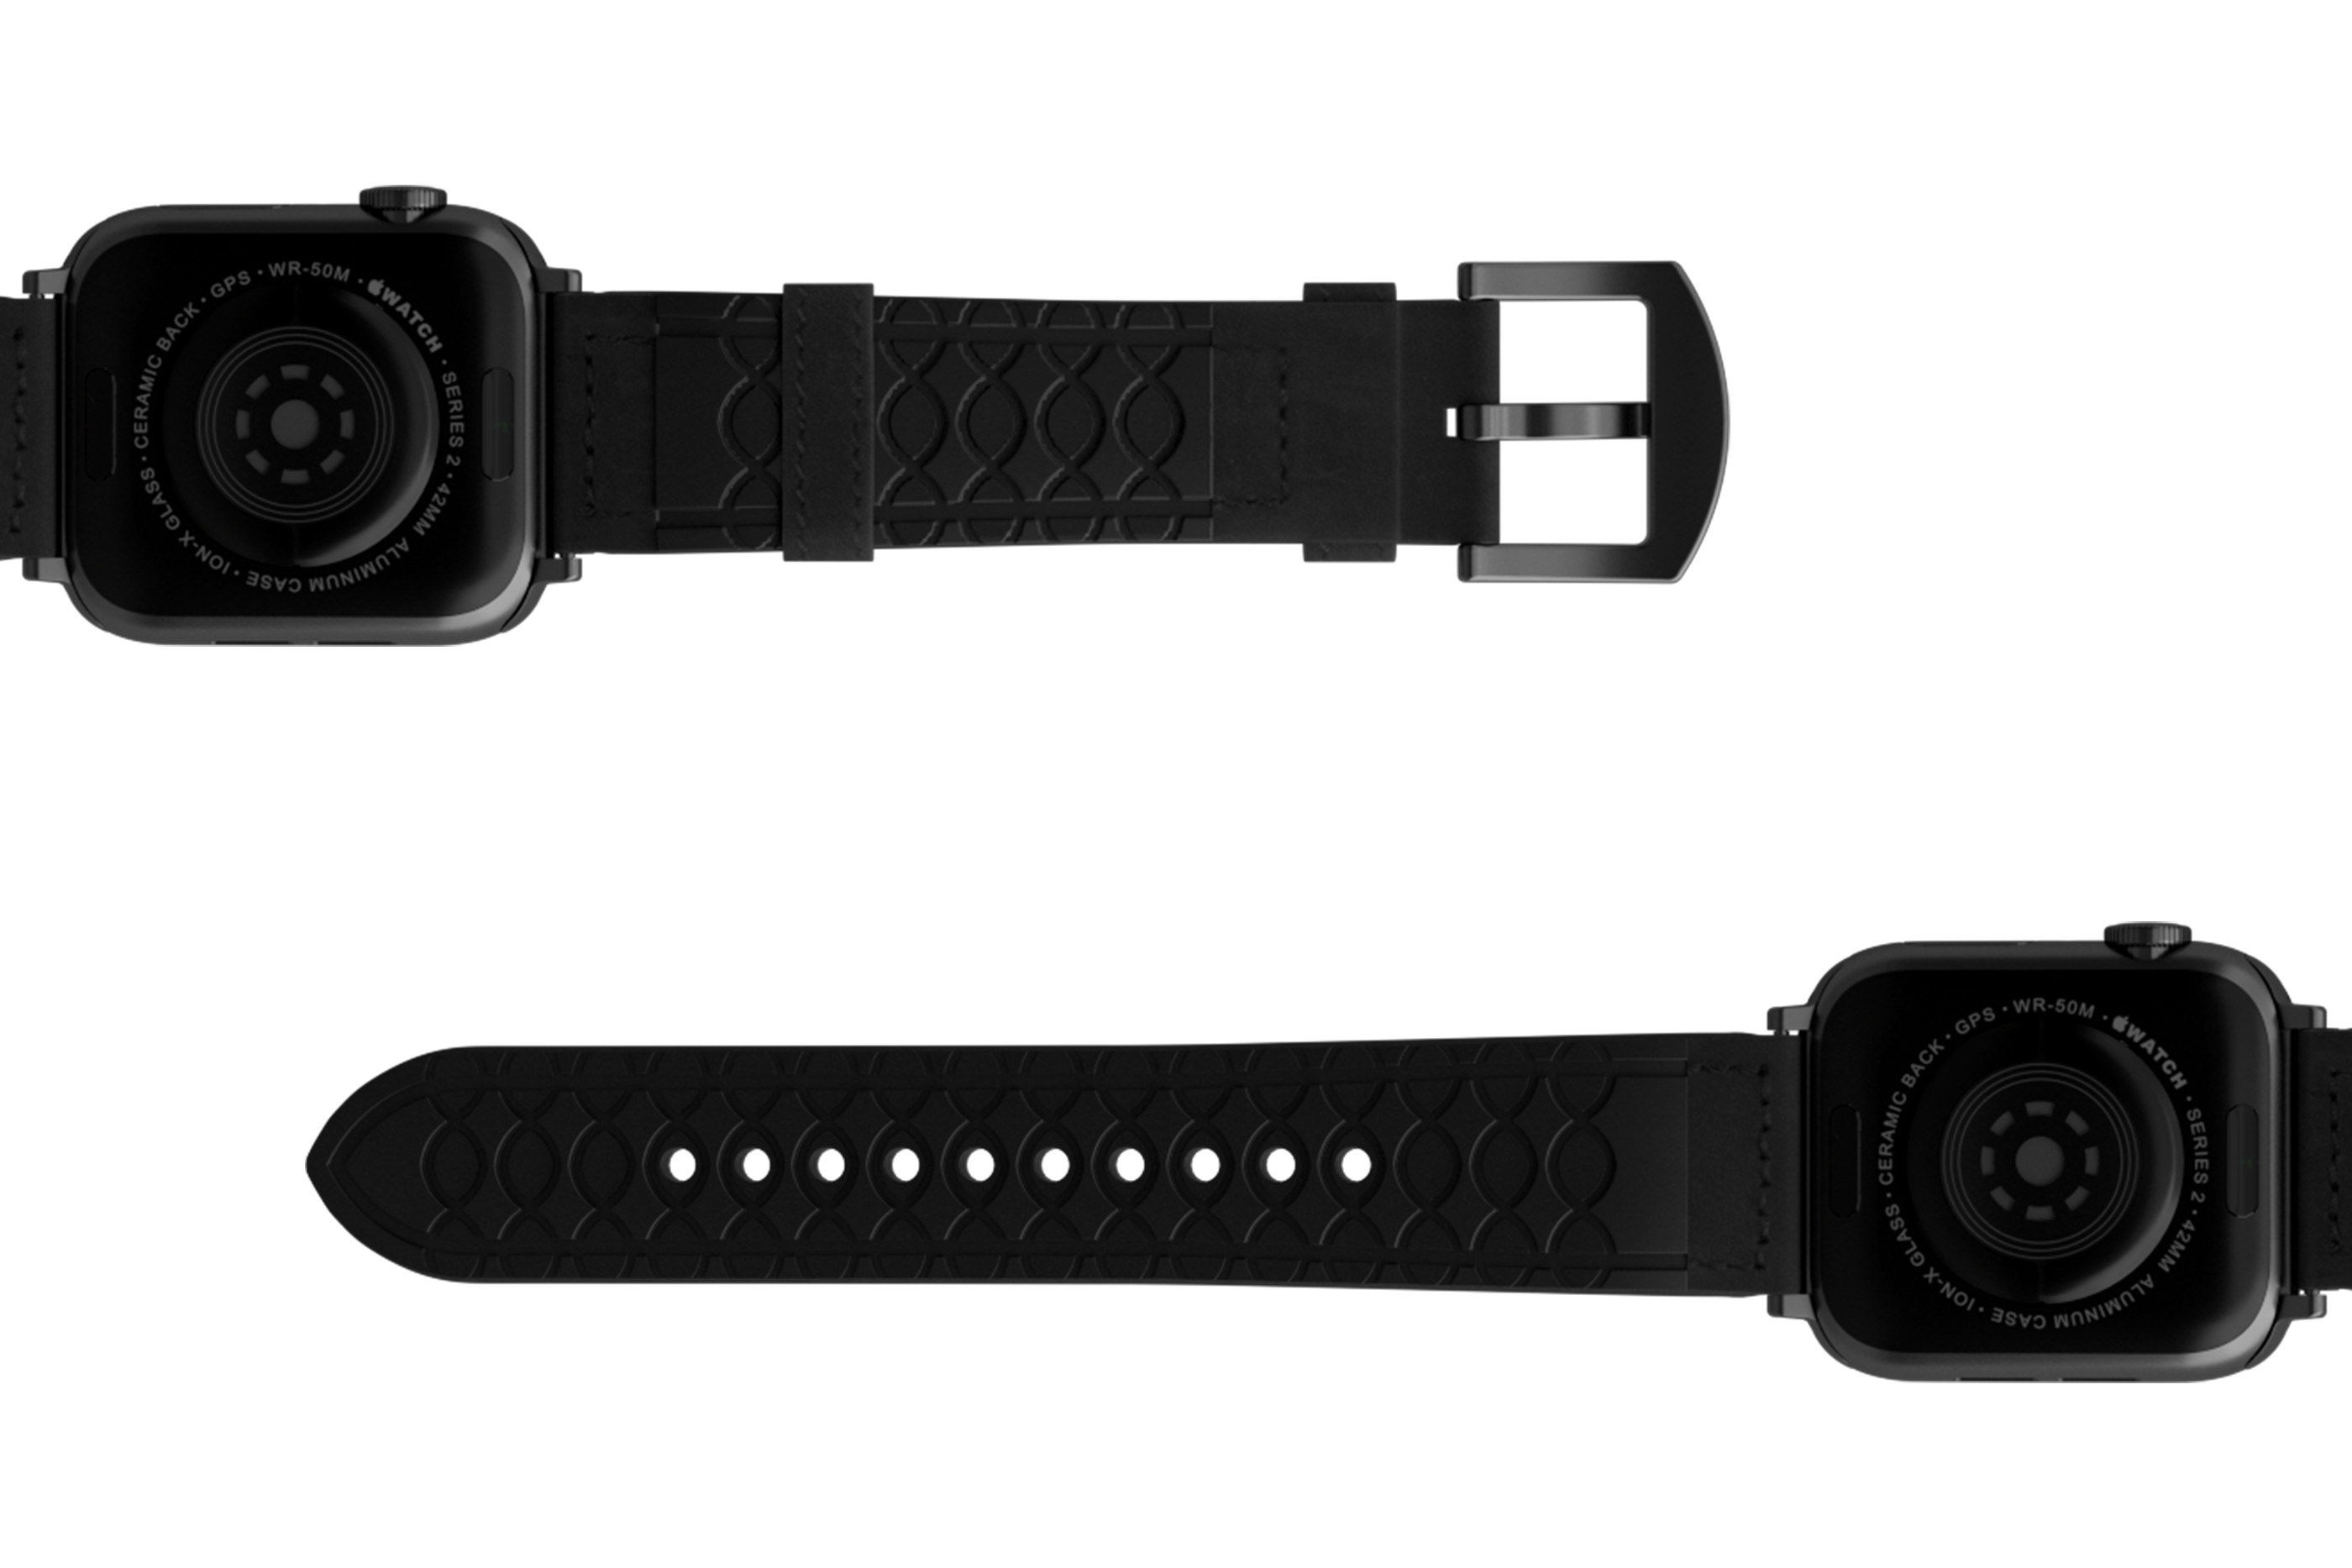 Vulcan Obsidian Black Leather Apple   watch band with gray hardware viewed bottom up